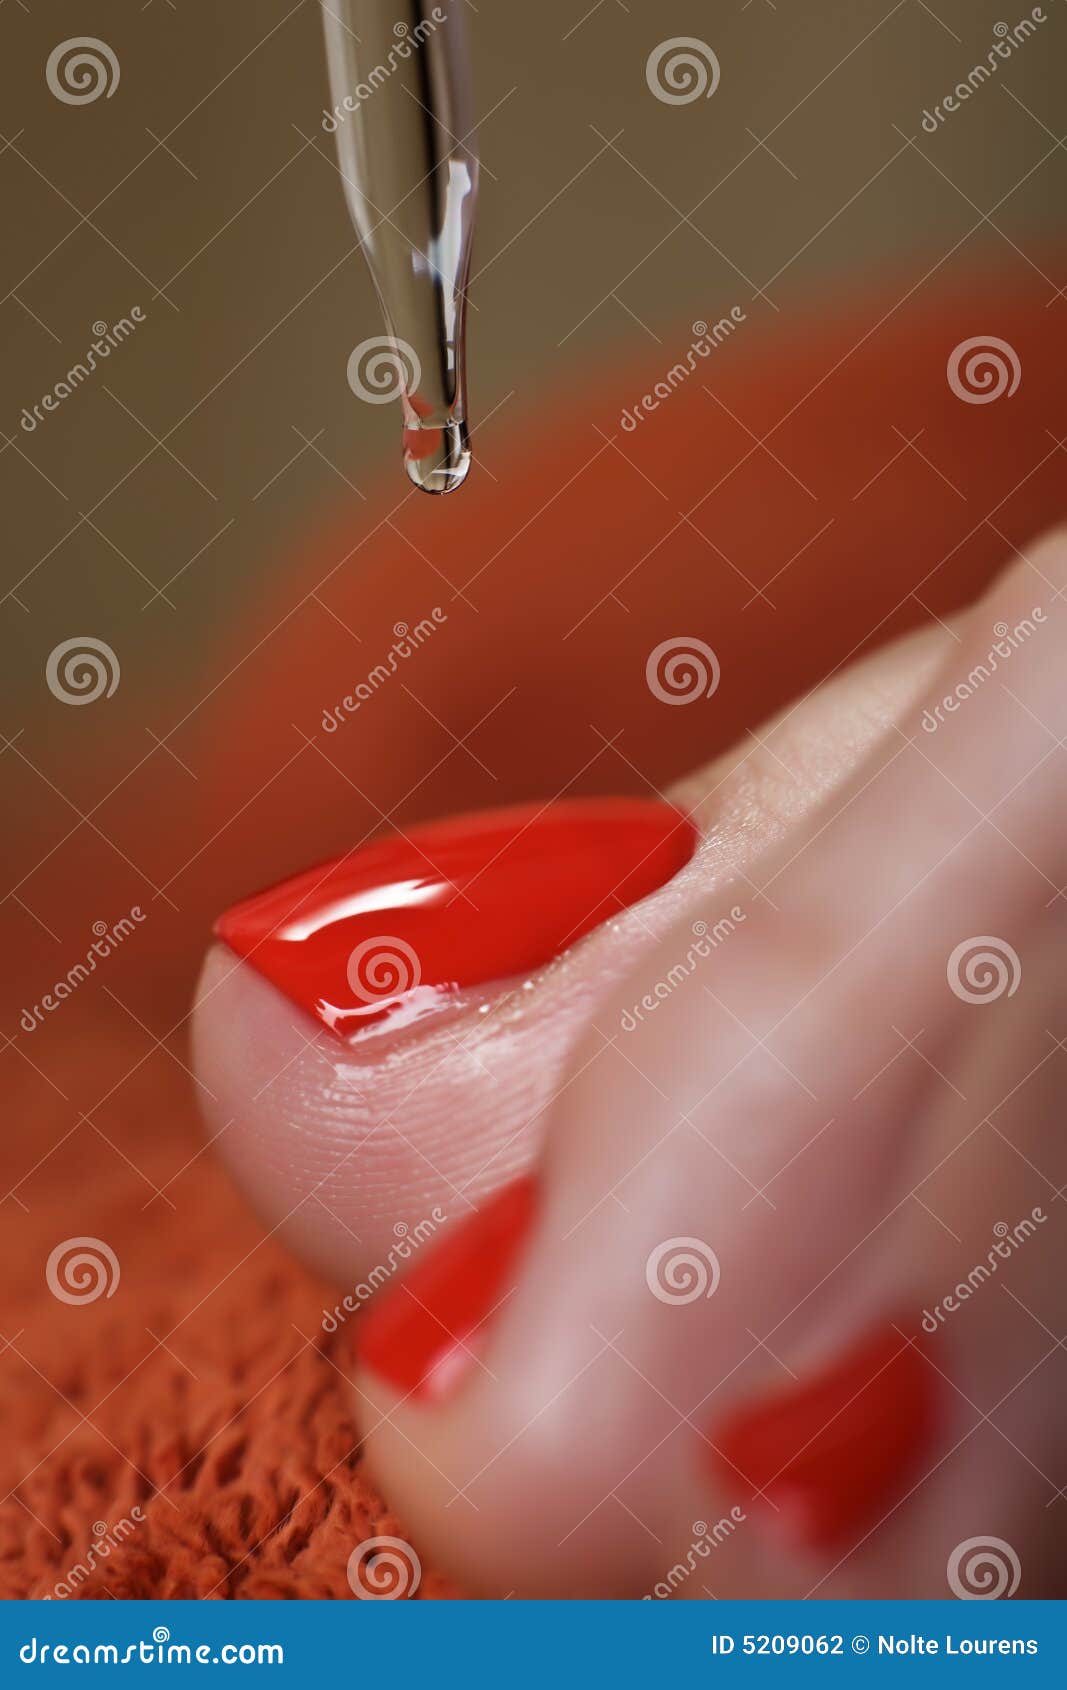 Pedicure stock photo. Image of polish, dayspa, cleansing - 5209062